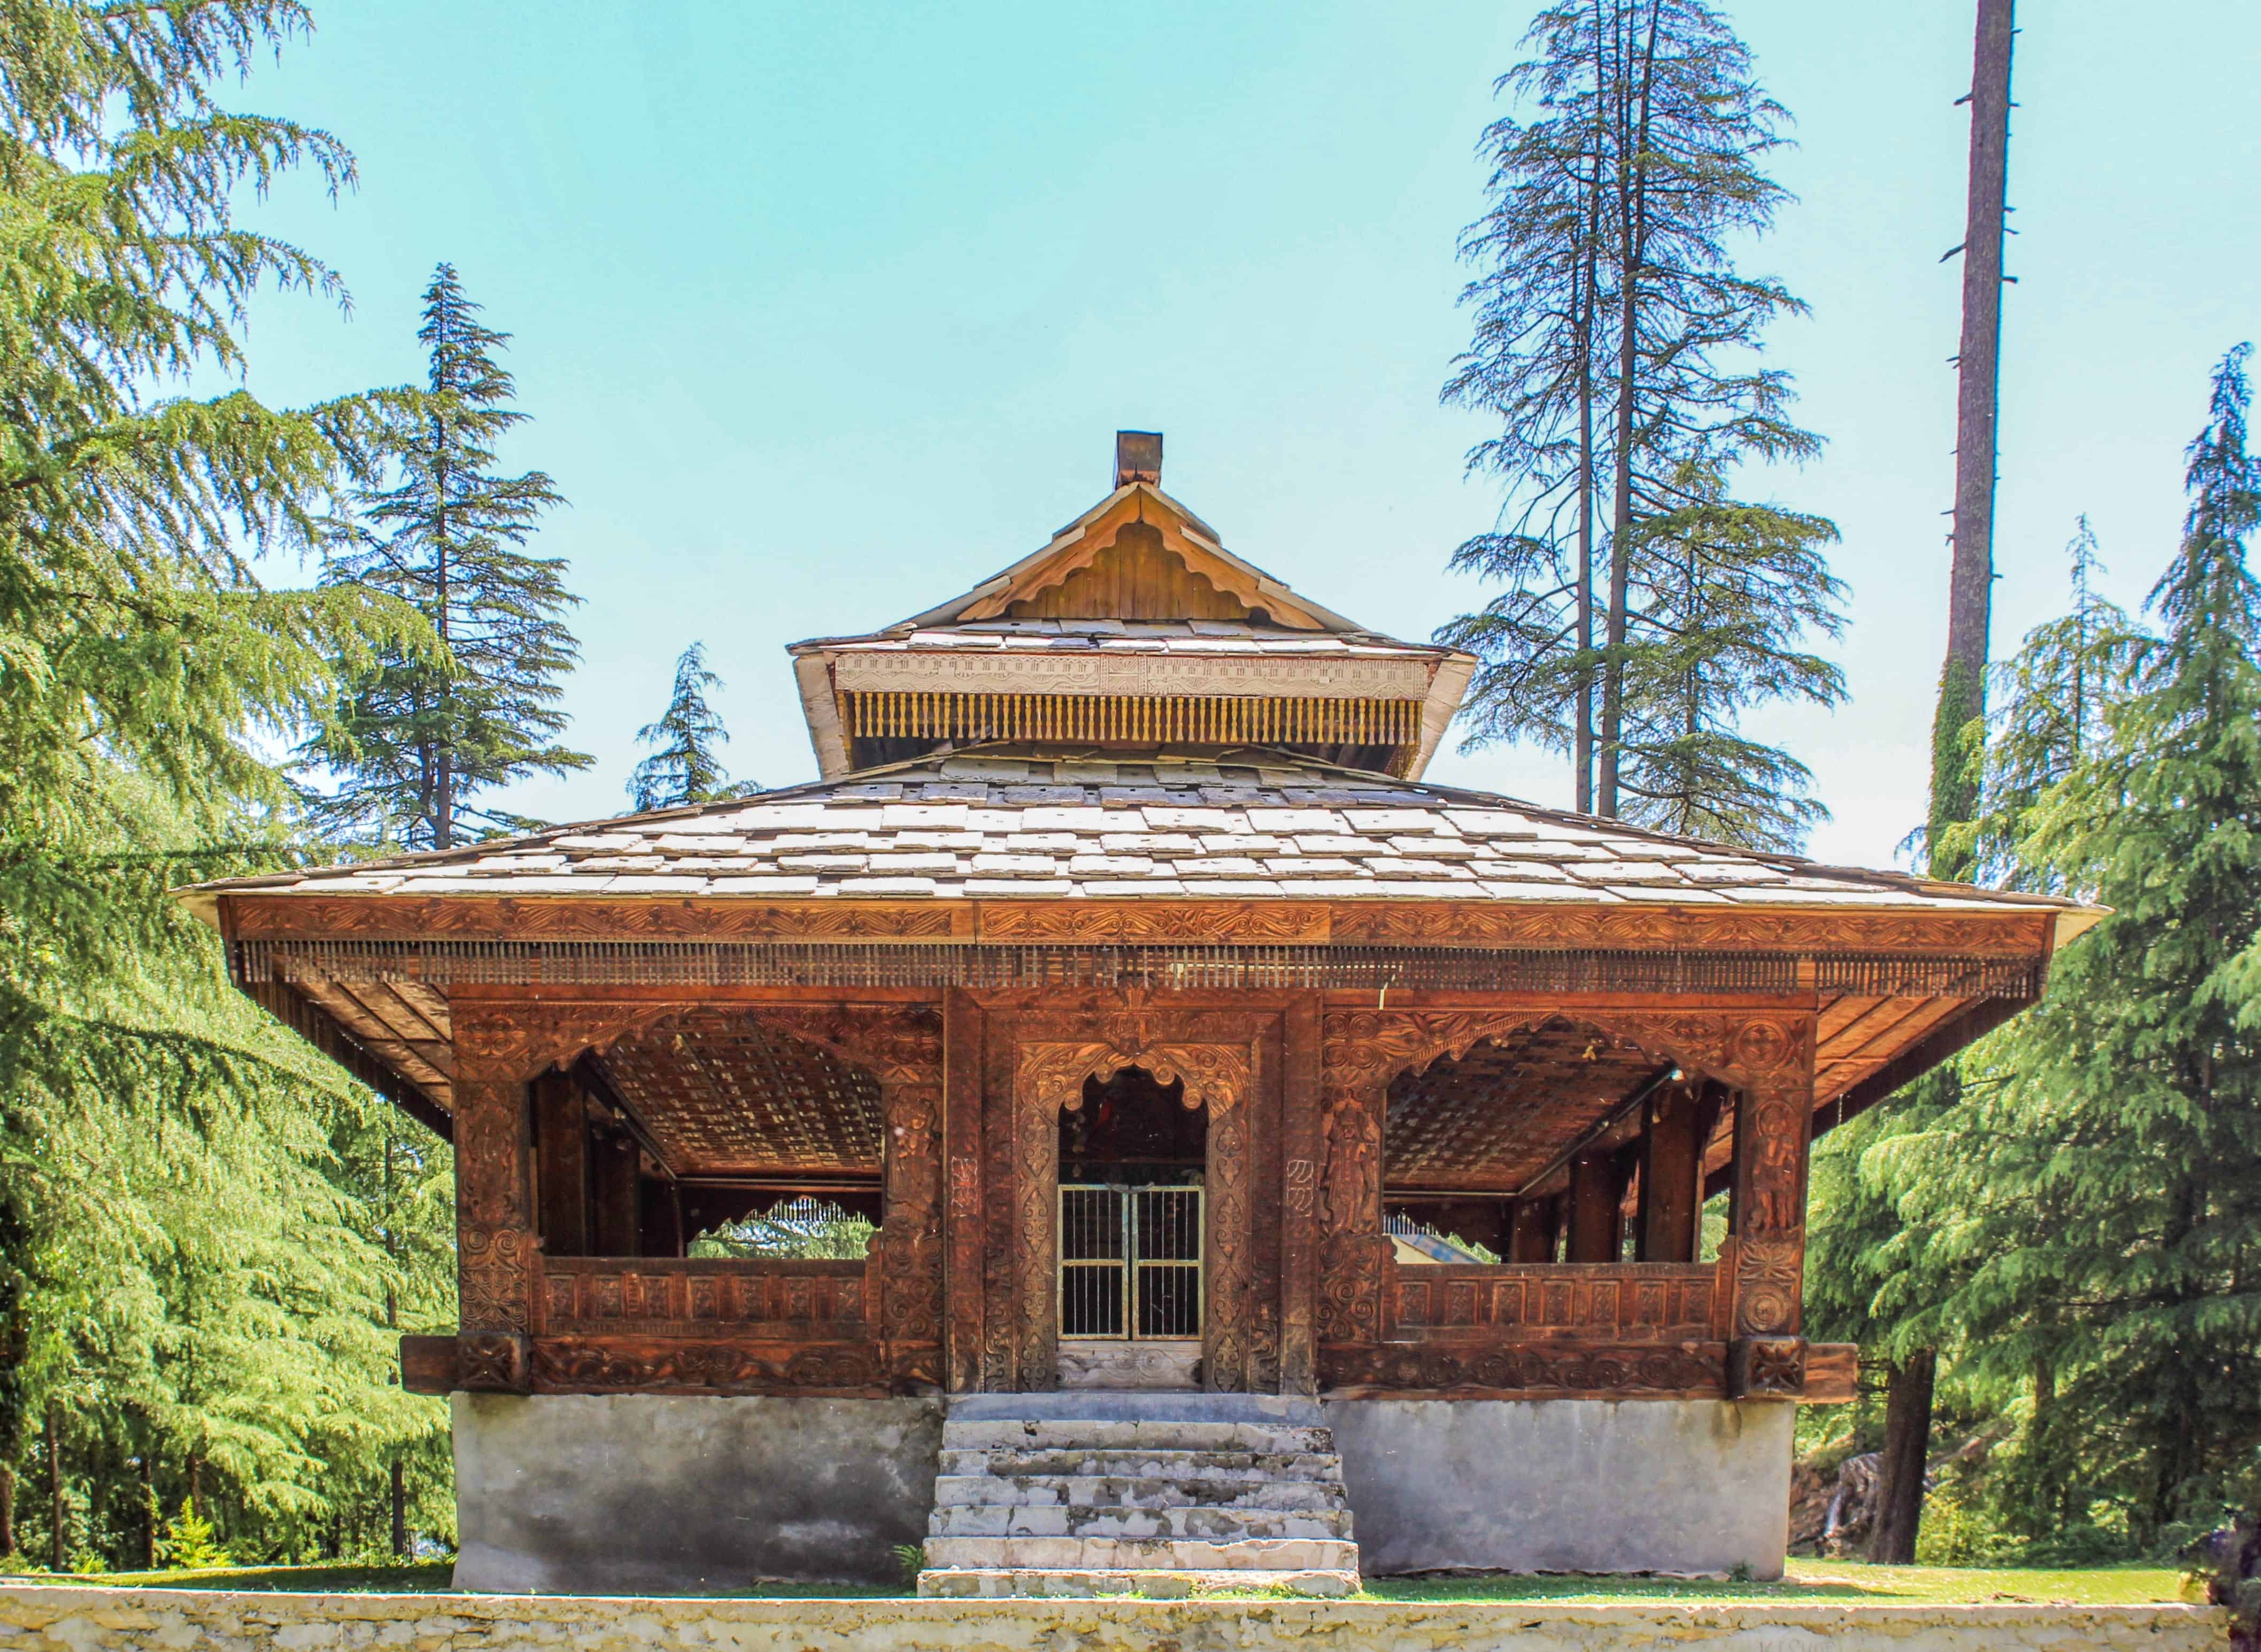 An ancient wooden temple in Sainj Valley